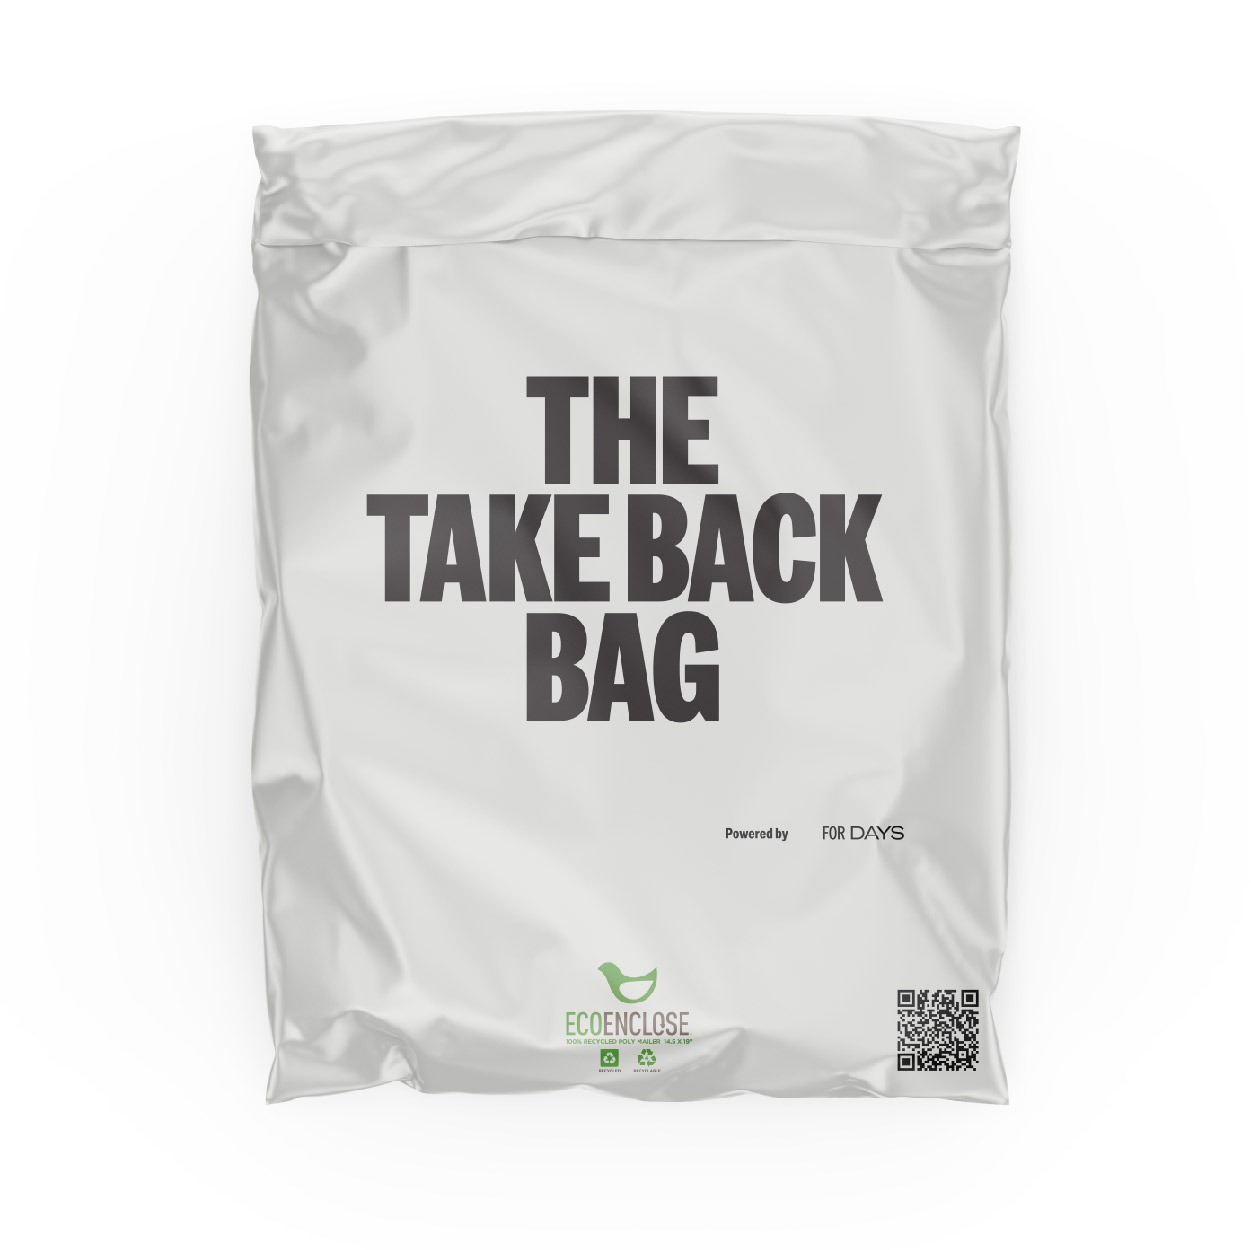 SDQCLIIF insulated take out bags,restaurant India | Ubuy